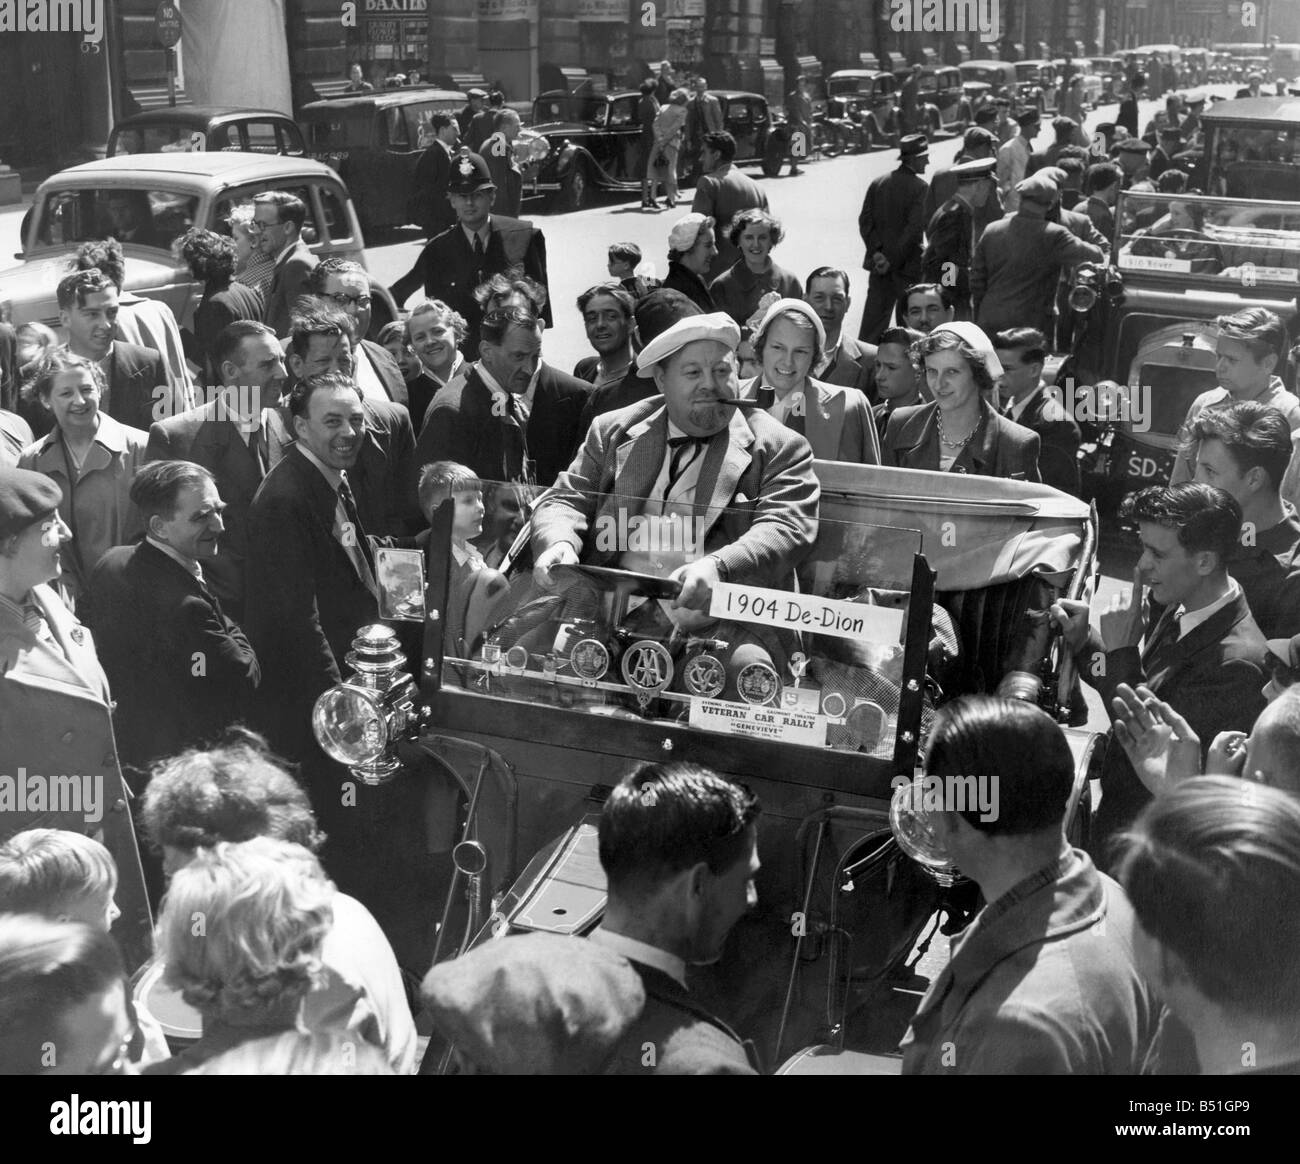 American folk song singer Burl Ives, trys the drivers seat in a 1904 De Dion, one of the entries in the Veteran Car Rally. Pic taken before they left the Gaumont Theatre, Oxford Street, Manchester. July 1953 P000007; Stock Photo